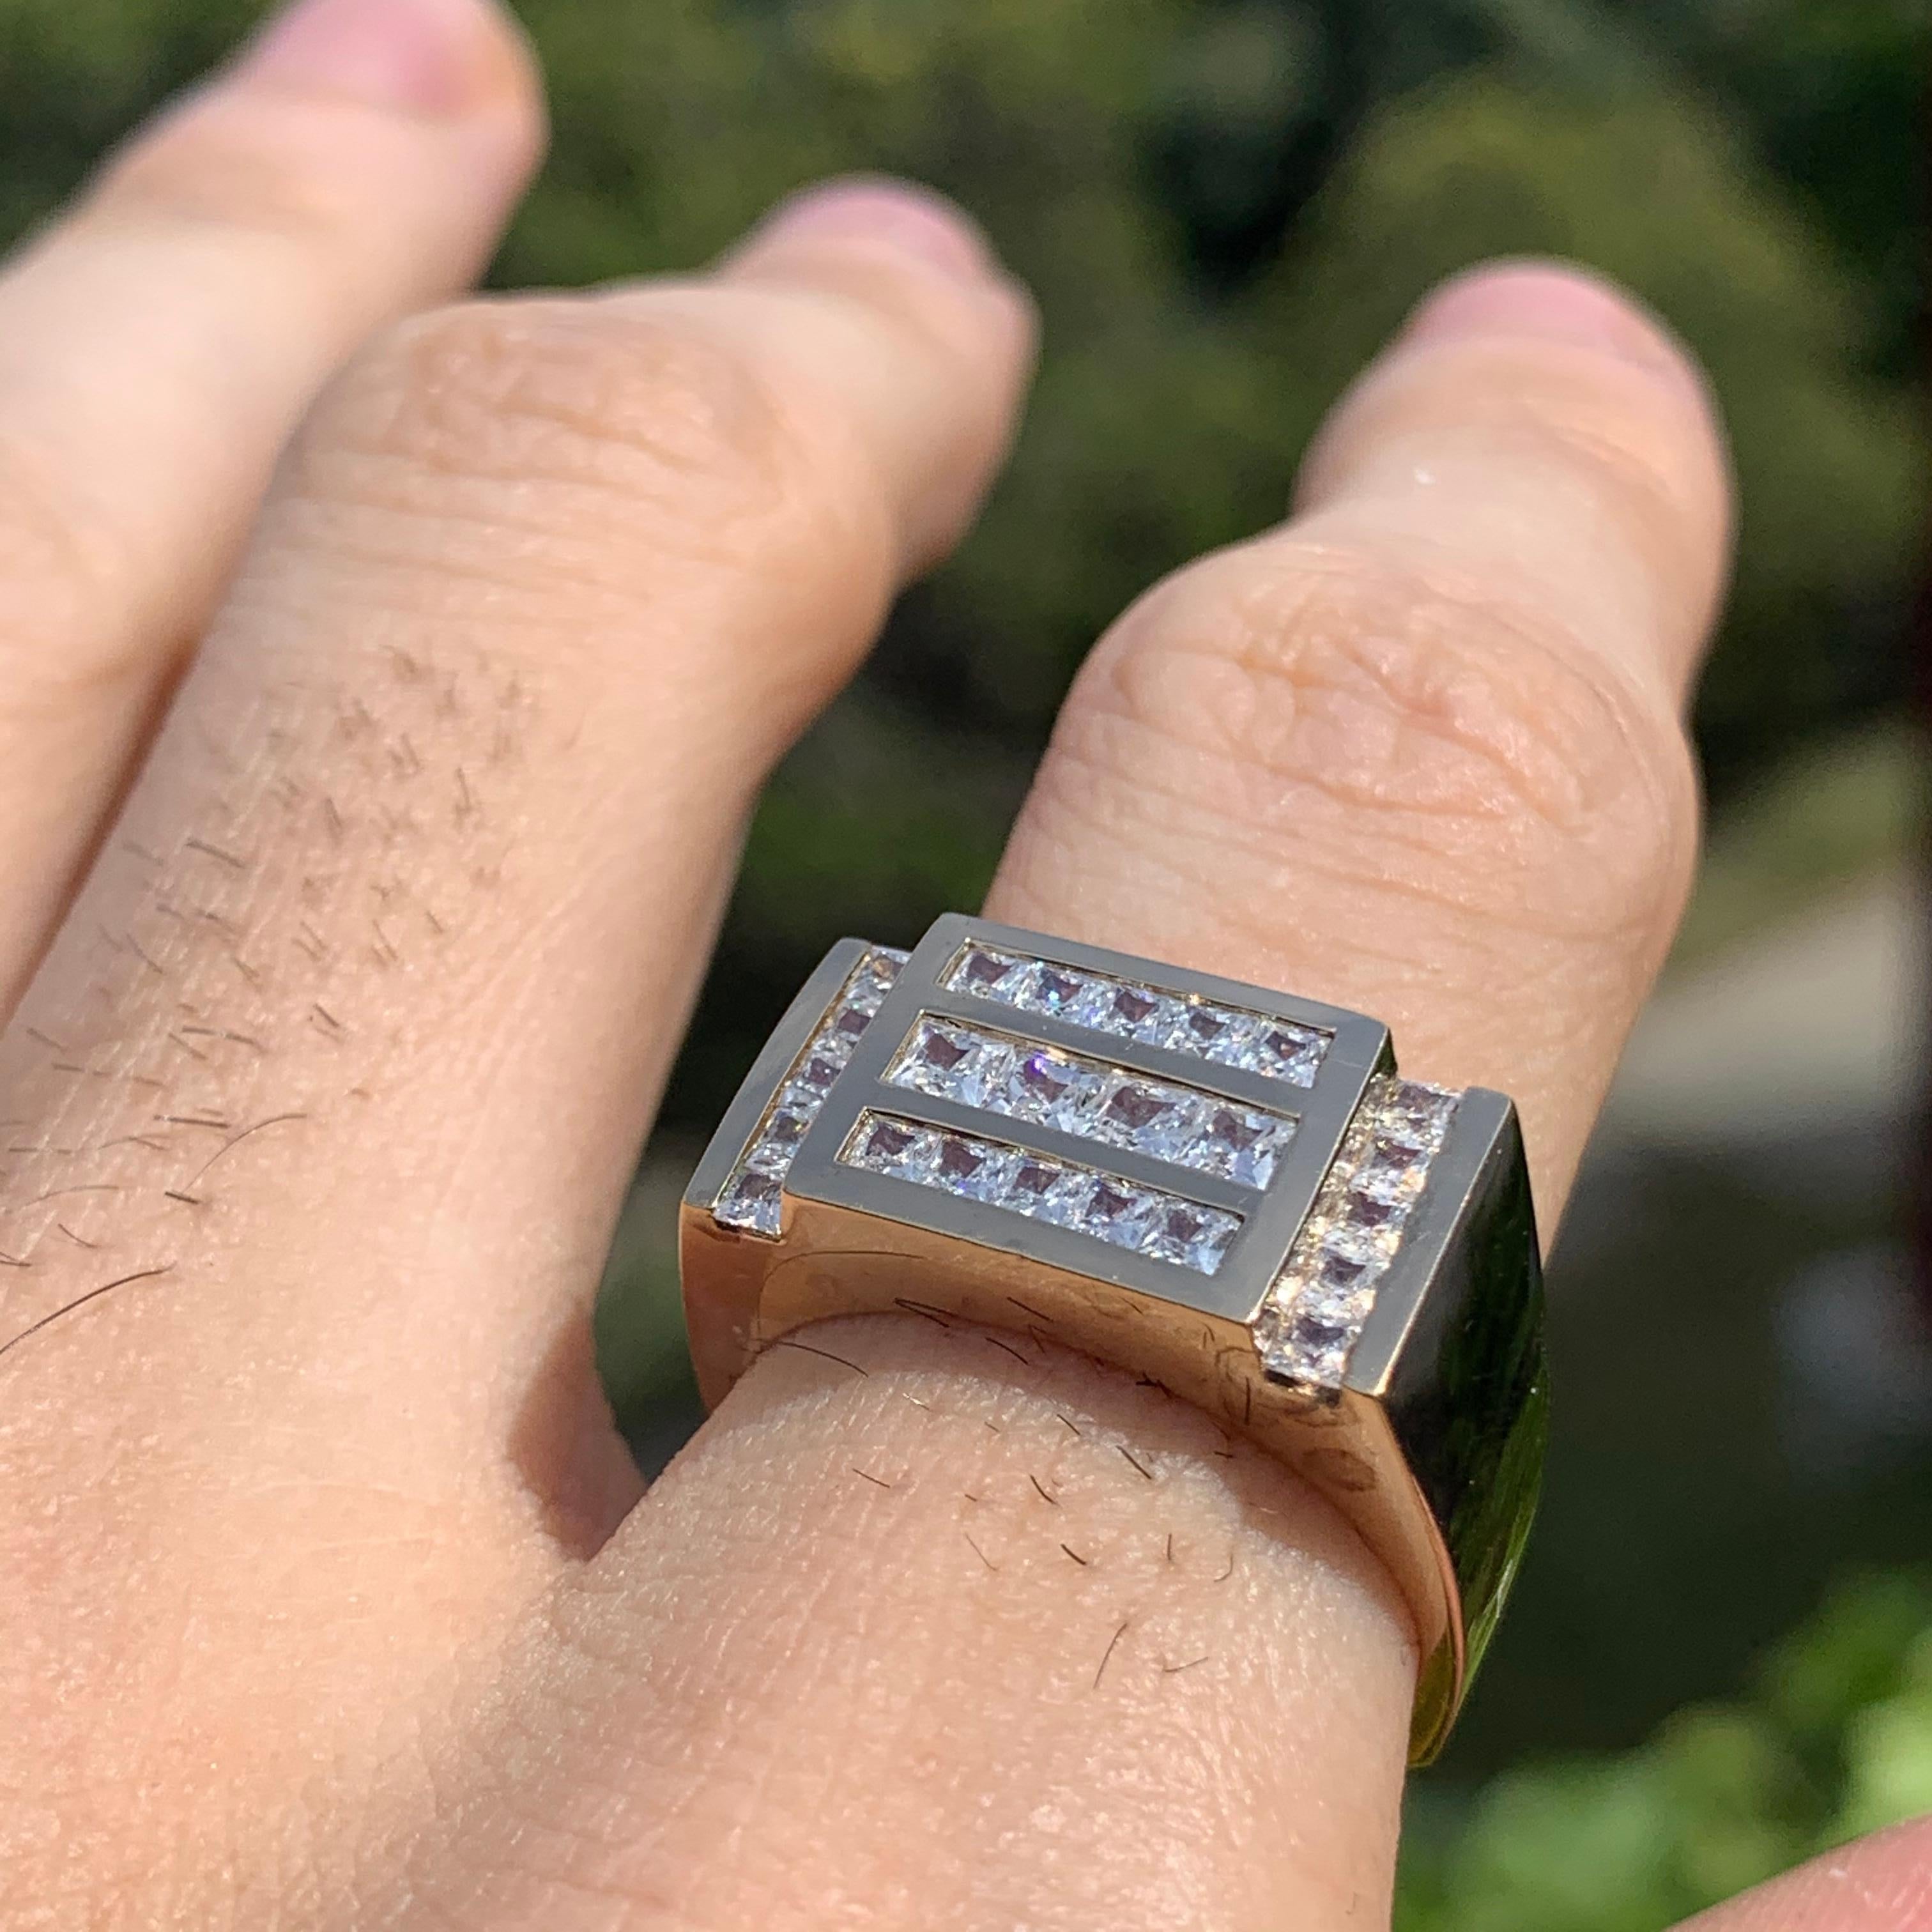 All Of Our Pieces Are 100% Made In Los Angeles, California.

Want This Beautiful Diamond and Gold Ring But Want To Save Money? We Can Make You This Real Gold and CZ ,  Your Cost is only $2200

If Item Is Already Sold It Will Be Customer Made To